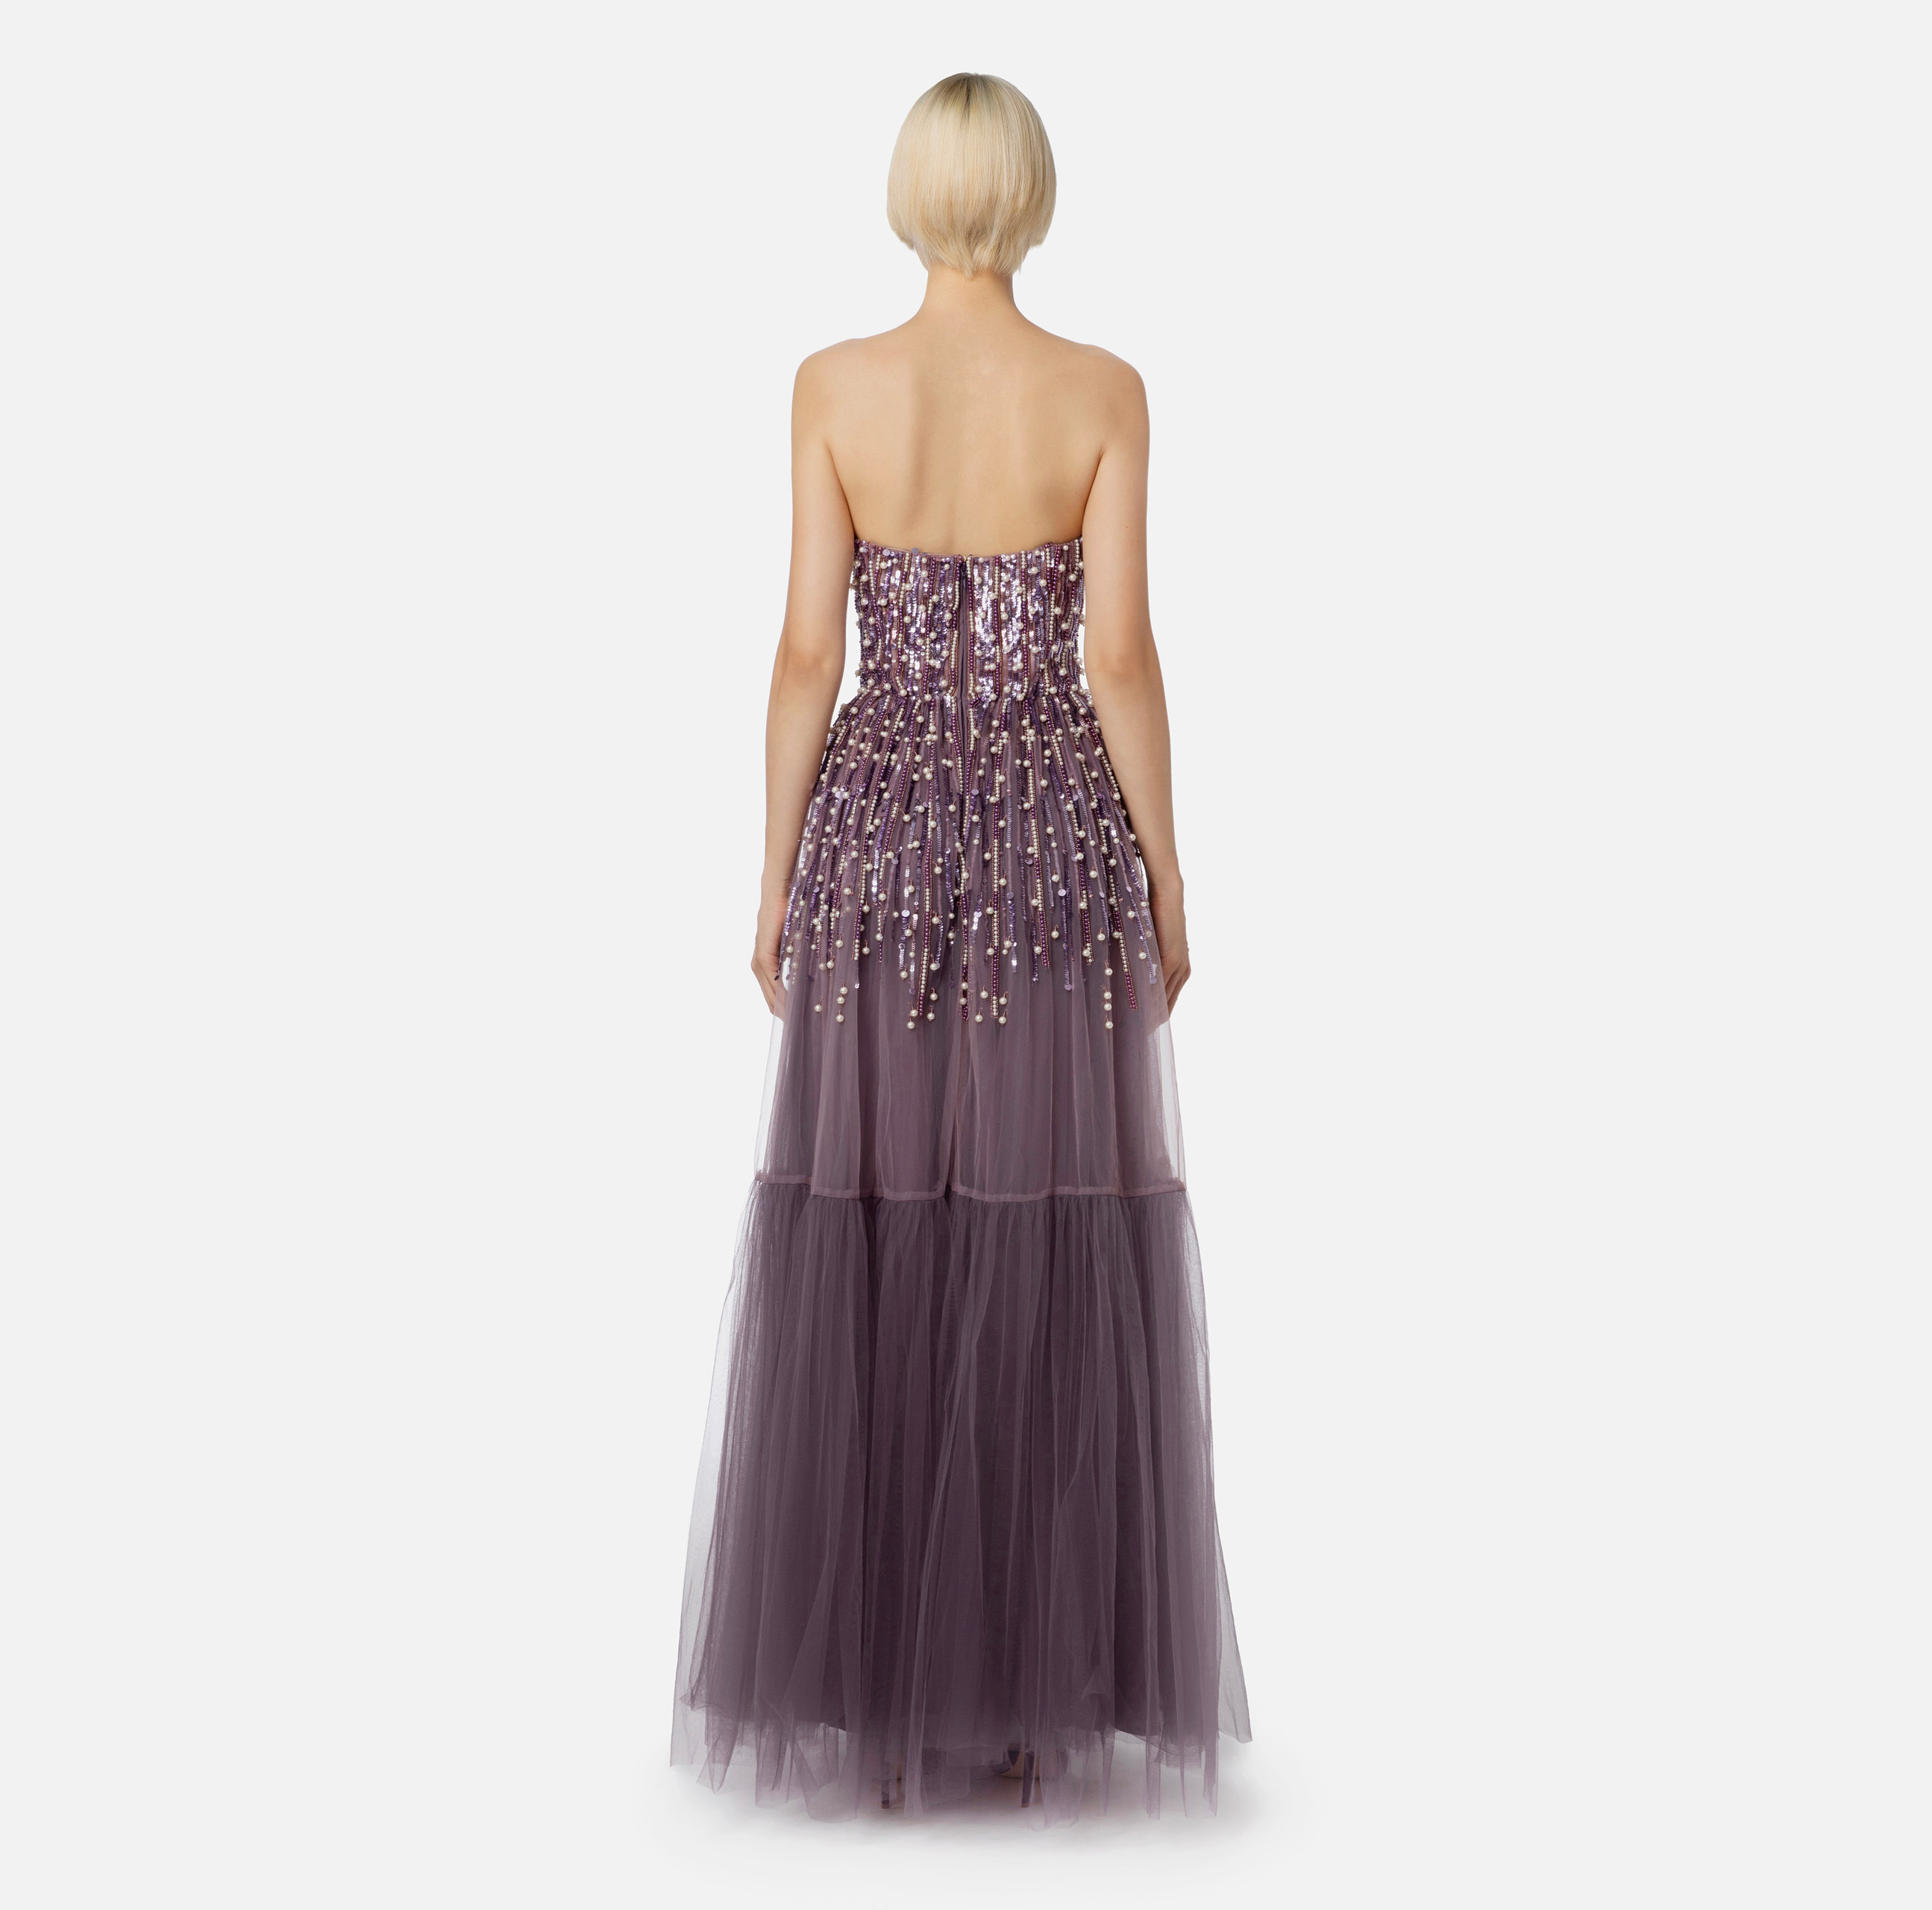 Red Carpet dress with sequins and pearls - Elisabetta Franchi